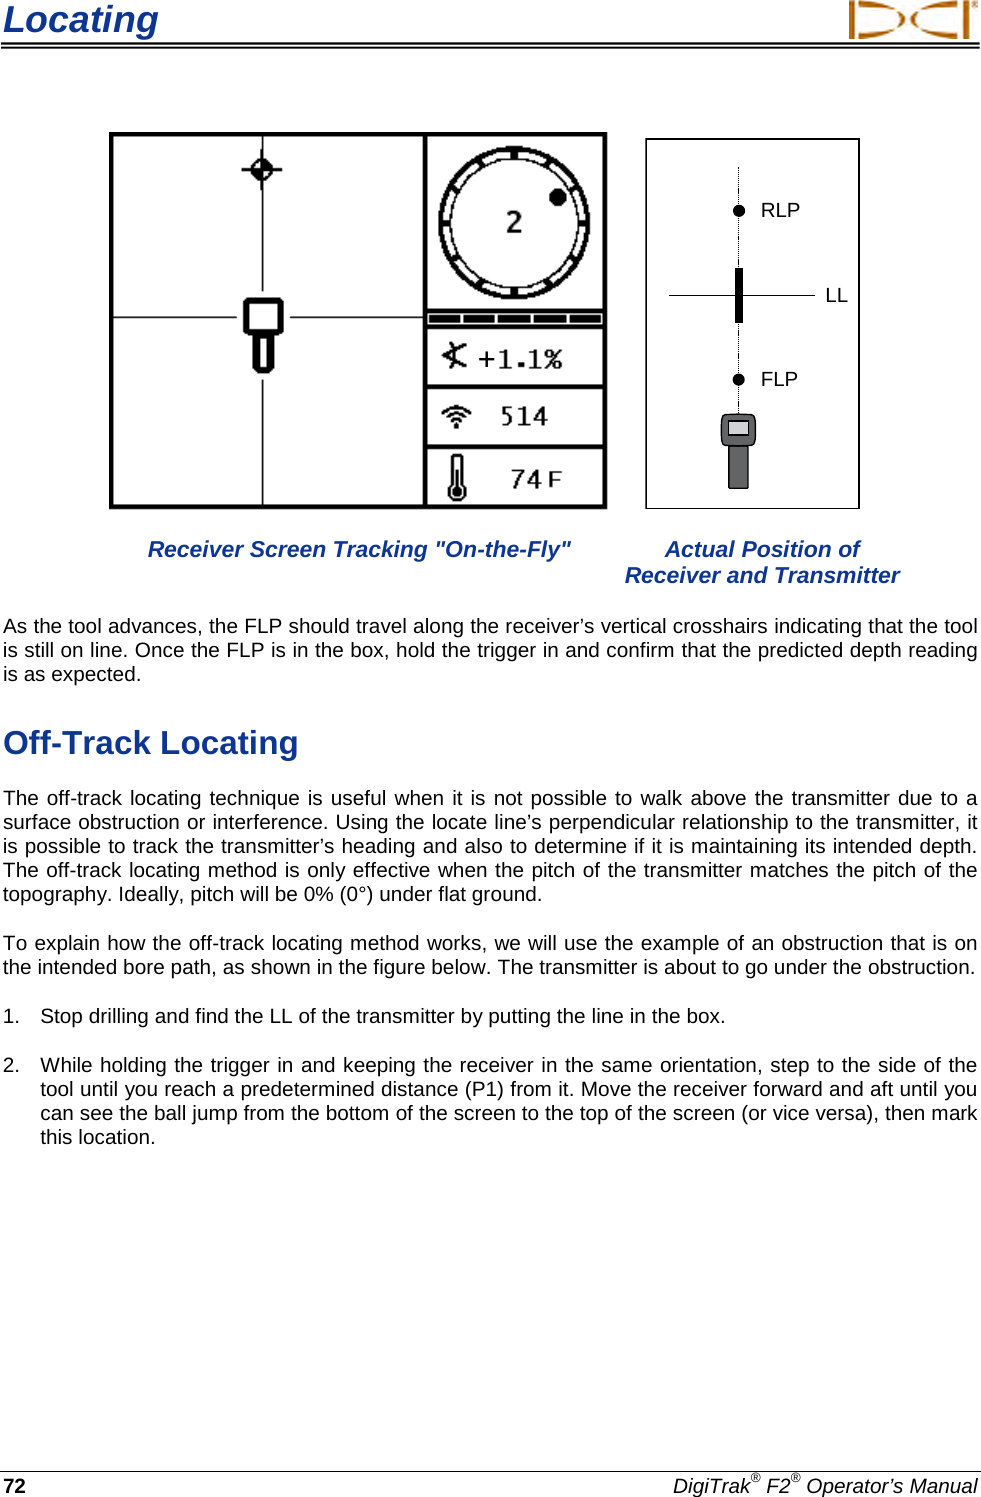 Locating     72 DigiTrak® F2® Operator’s Manual    RLPFLPLL Receiver Screen Tracking &quot;On-the-Fly&quot; Actual Position of Receiver and Transmitter As the tool advances, the FLP should travel along the receiver’s vertical crosshairs indicating that the tool is still on line. Once the FLP is in the box, hold the trigger in and confirm that the predicted depth reading is as expected. Off-Track Locating The off-track locating technique is useful when it is not possible to walk above the transmitter due to a surface obstruction or interference. Using the locate line’s perpendicular relationship to the transmitter, it is possible to track the transmitter’s heading and also to determine if it is maintaining its intended depth. The off-track locating method is only effective when the pitch of the transmitter matches the pitch of the topography. Ideally, pitch will be 0% (0°) under flat ground. To explain how the off-track locating method works, we will use the example of an obstruction that is on the intended bore path, as shown in the figure below. The transmitter is about to go under the obstruction. 1. Stop drilling and find the LL of the transmitter by putting the line in the box. 2. While holding the trigger in and keeping the receiver in the same orientation, step to the side of the tool until you reach a predetermined distance (P1) from it. Move the receiver forward and aft until you can see the ball jump from the bottom of the screen to the top of the screen (or vice versa), then mark this location. + 